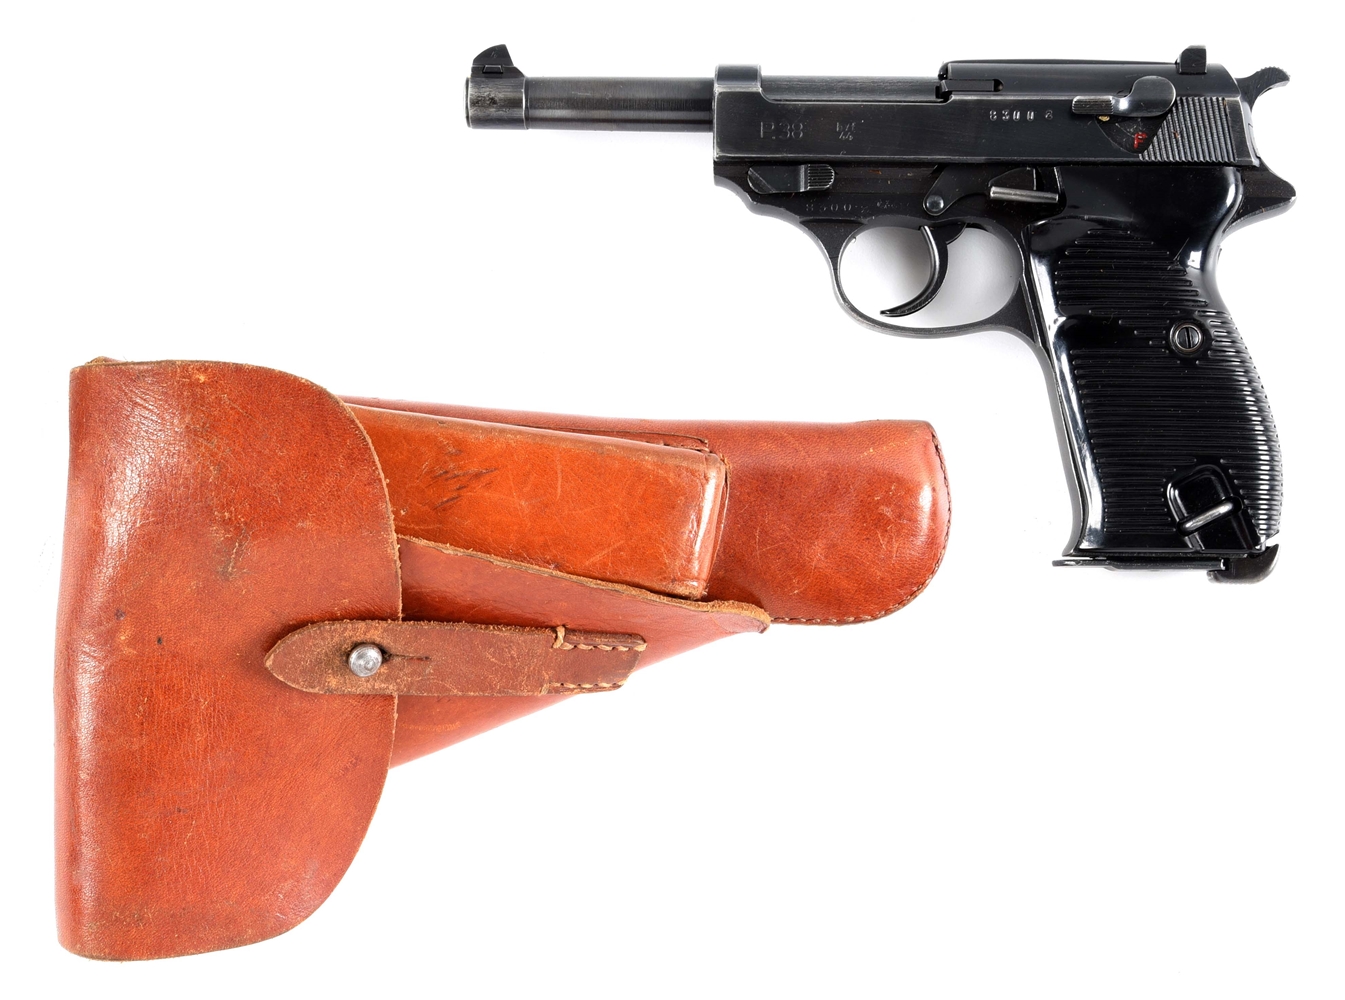 (C) GERMAN WORLD WAR II MAUSER "BYF 44" CODE P.38 SEMI-AUTOMATIC PISTOL WITH HOLSTER.